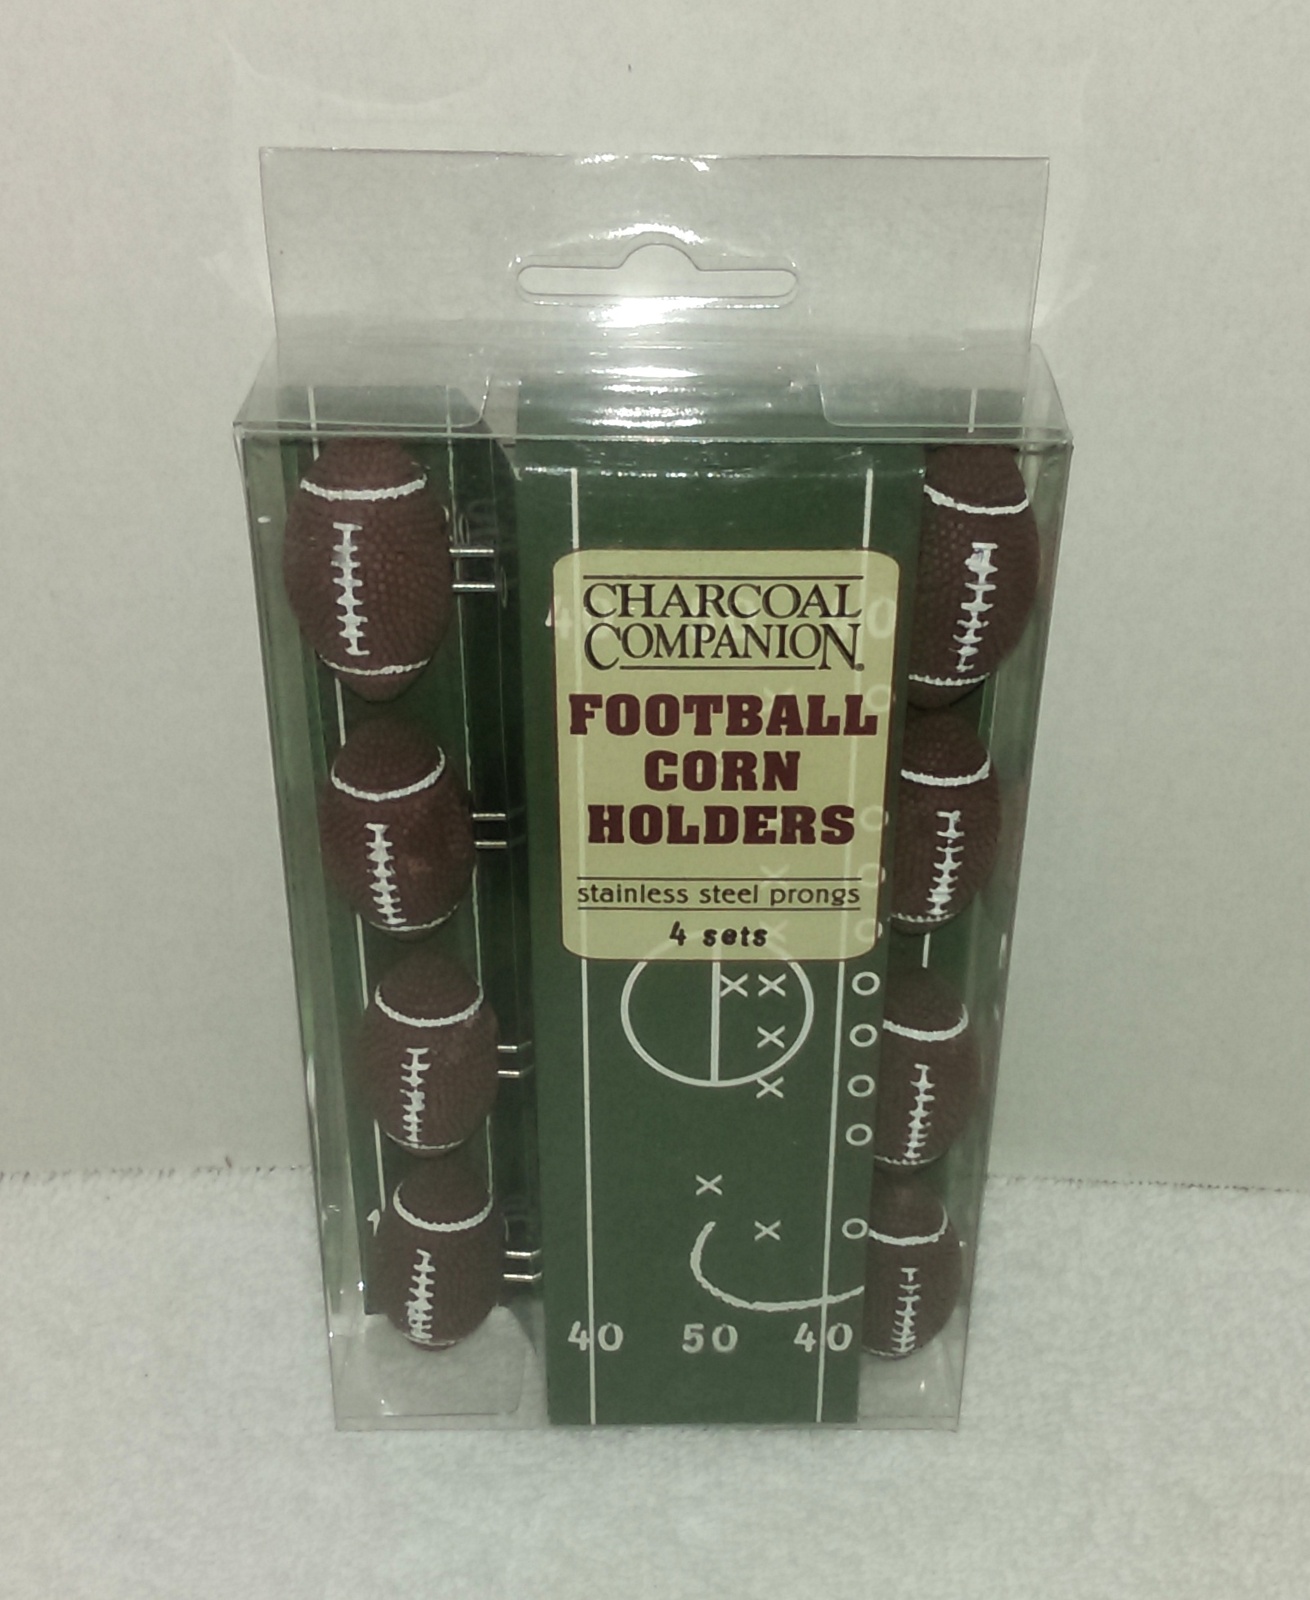 Charcoal Companion Football Corn Holders Stainless Steel Prongs - 8 Ct./4 Pair - $3.95